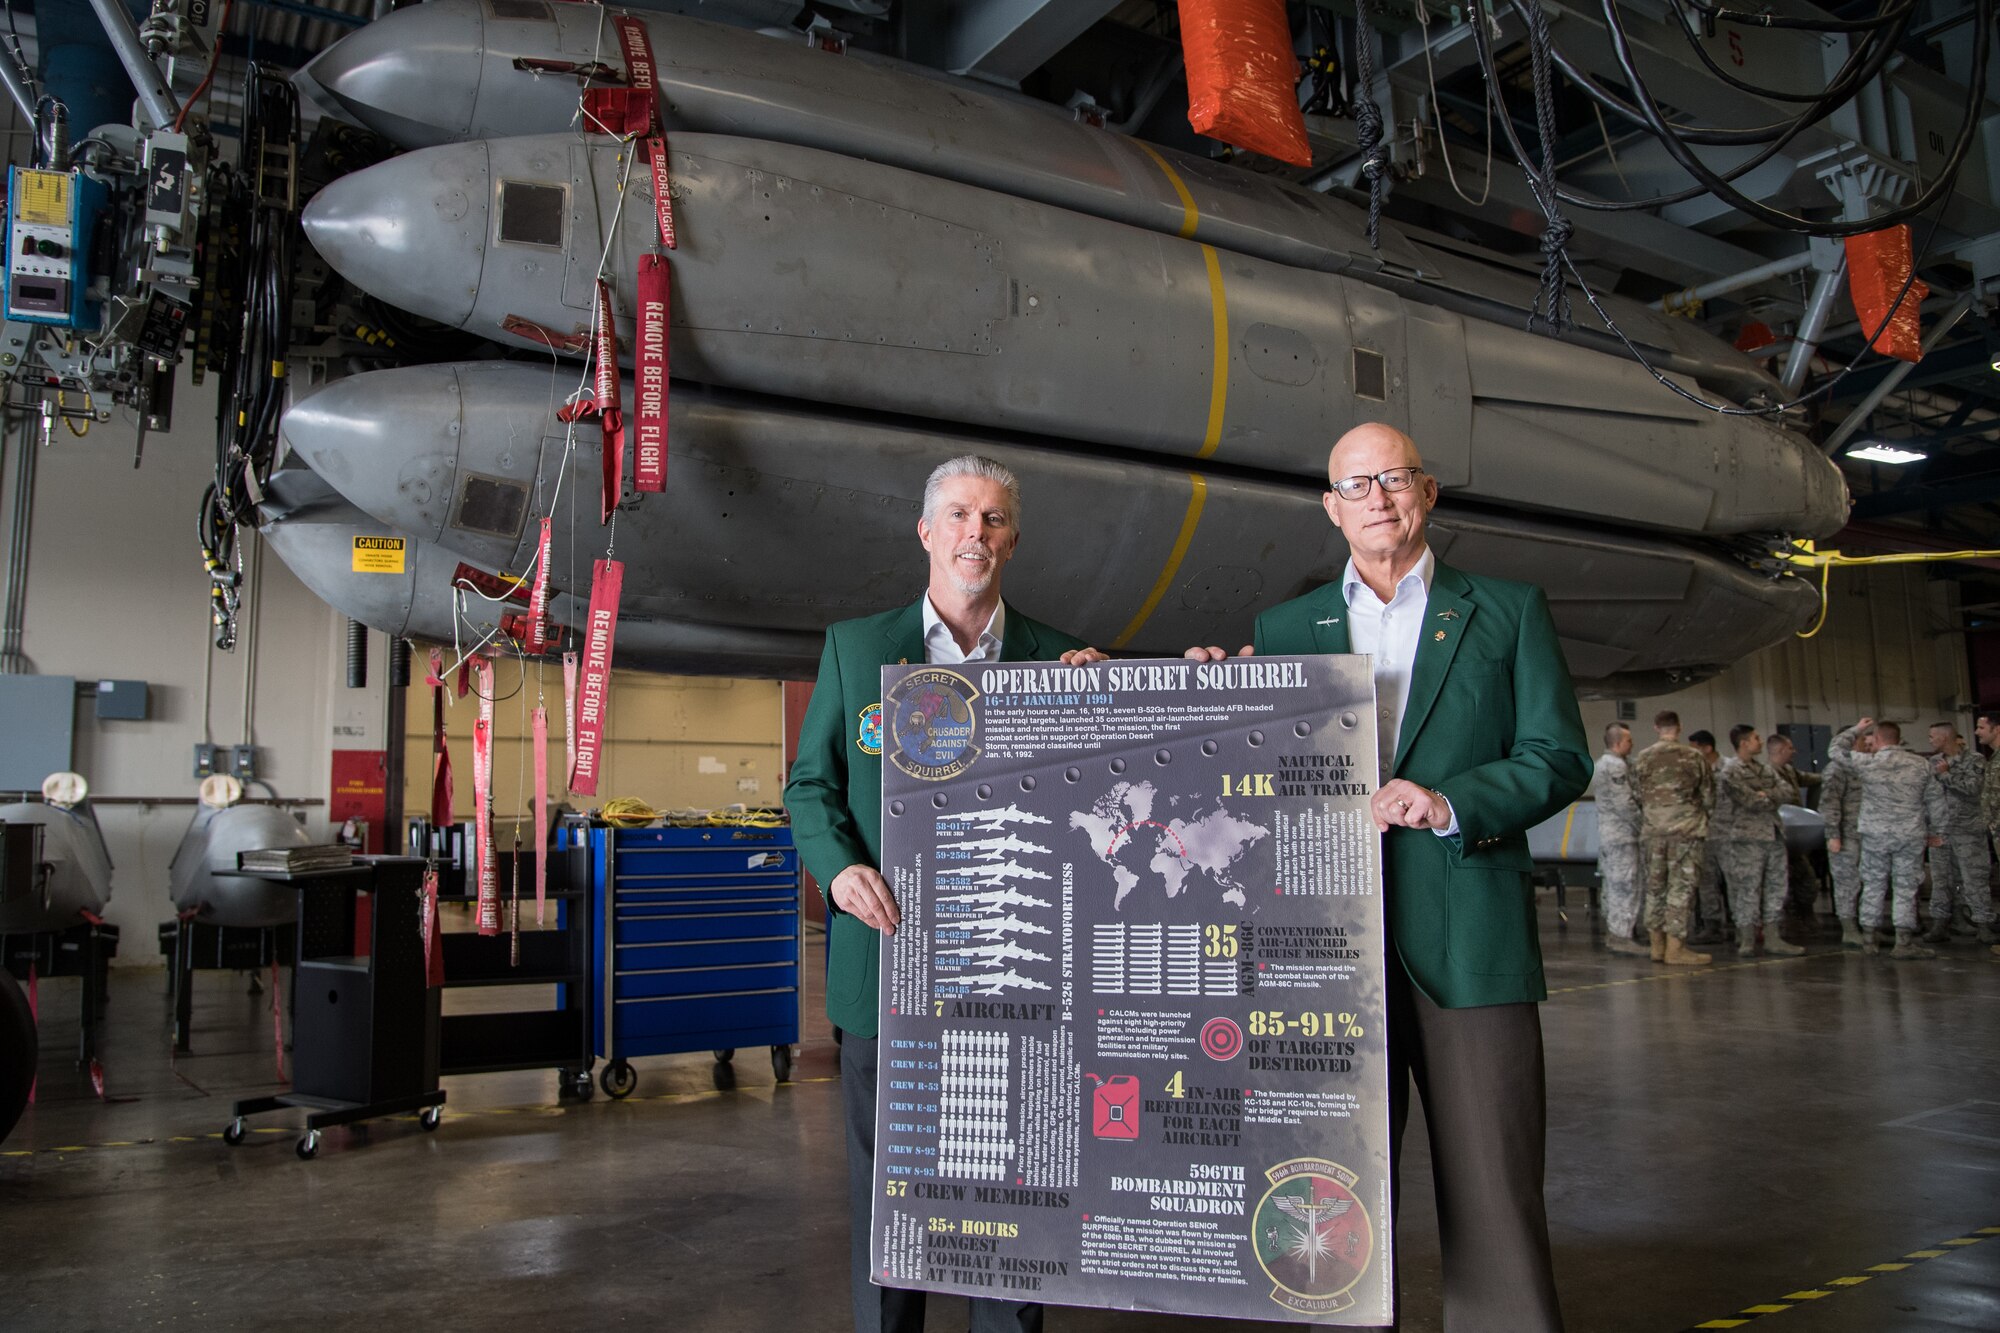 Retired Cols. Trey Morriss (left) and Warren Ward (right), members of Operation Secret Squirrel, stand in front of the final Conventional Air-Launched Cruise Missile (CALCM) package at Barksdale Air Force Base, La., Nov. 20, 2019. Operation Secret Squirrel was the first time CALCM missiles were used in combat. (U.S. Air Force photo by Airman 1st Class Jacob B. Wrightsman)